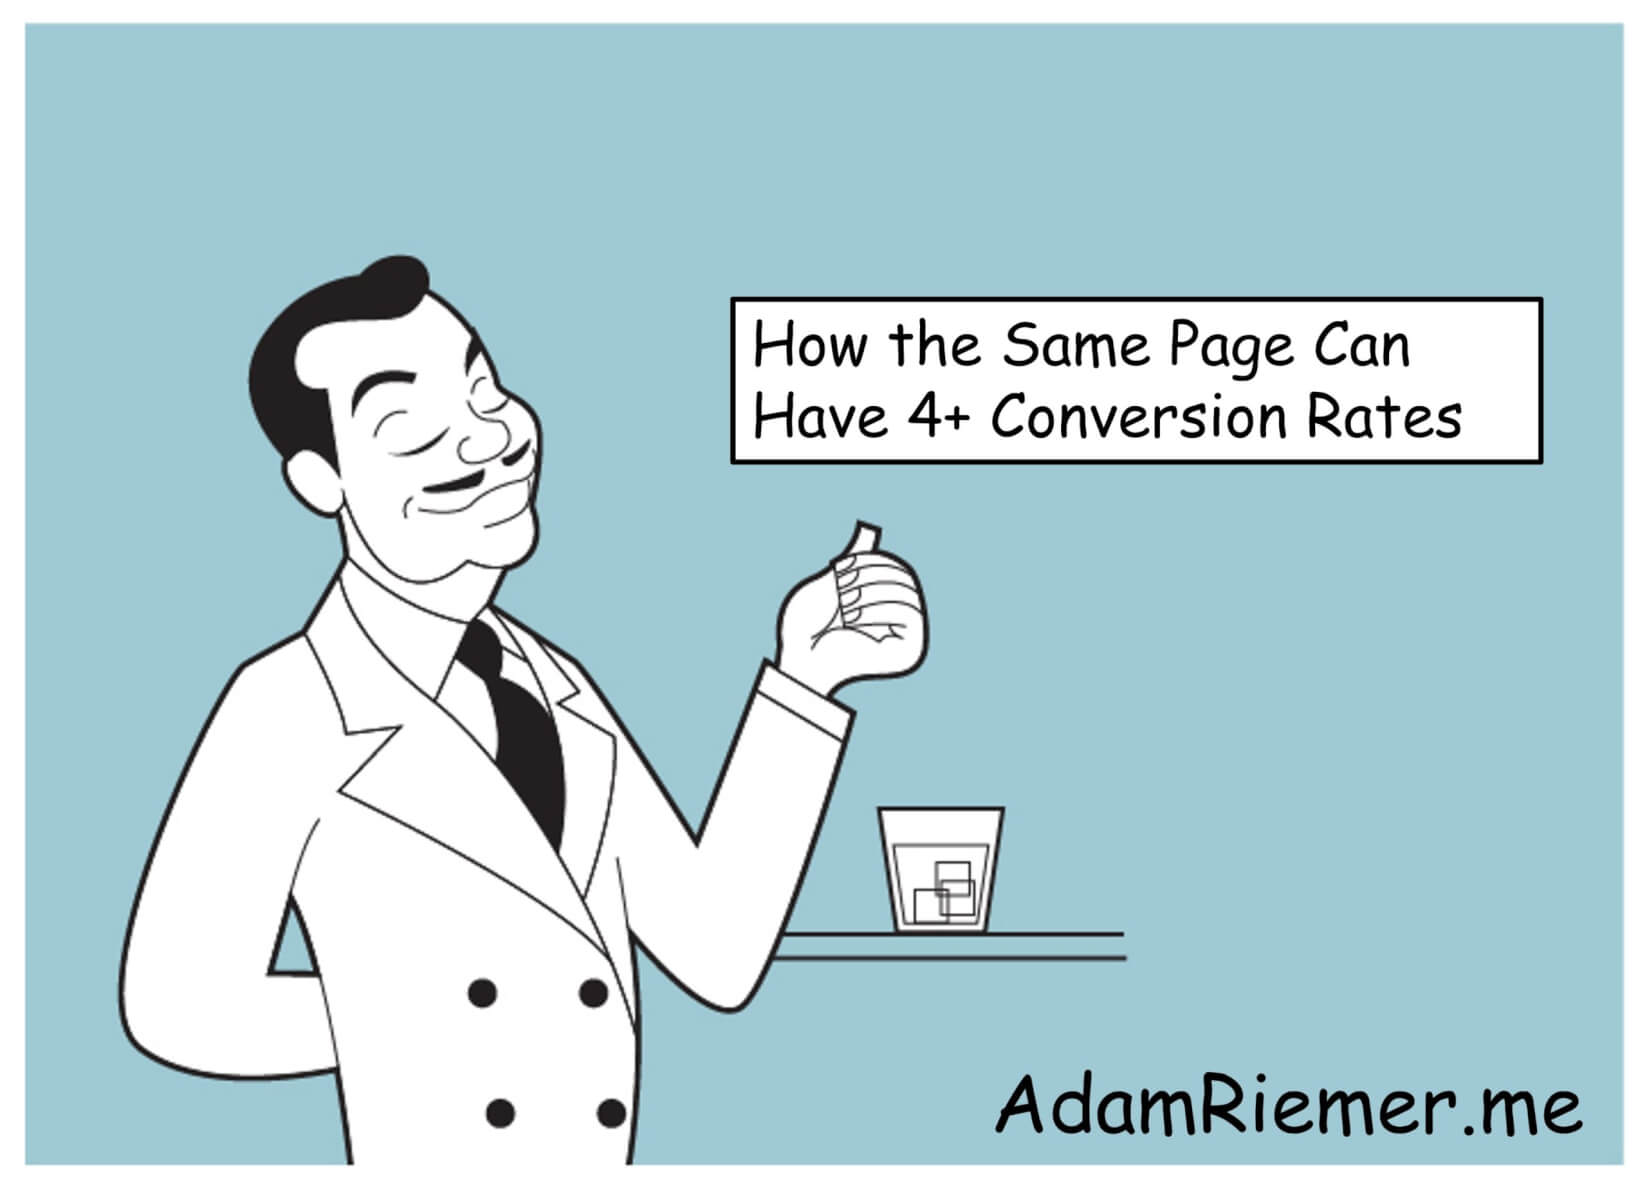 How the Same Page Can Have 4+ Conversion Rates